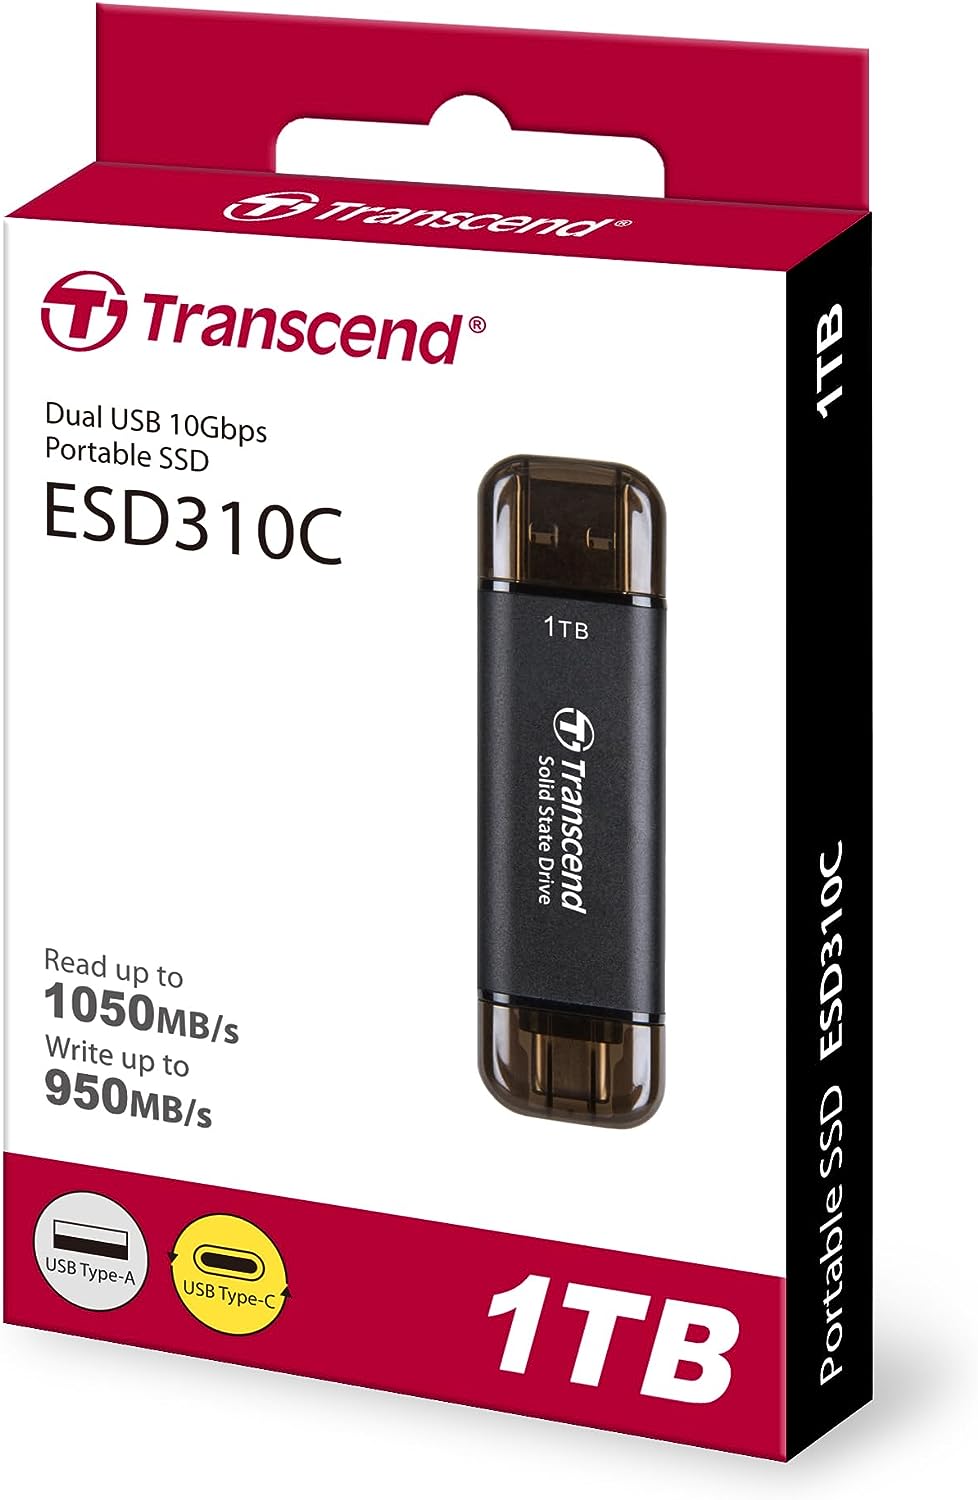 Transcend 1TB USB 10Gbps with Type-C and Type-A Portable SSD External Hard Drive (Brand New)